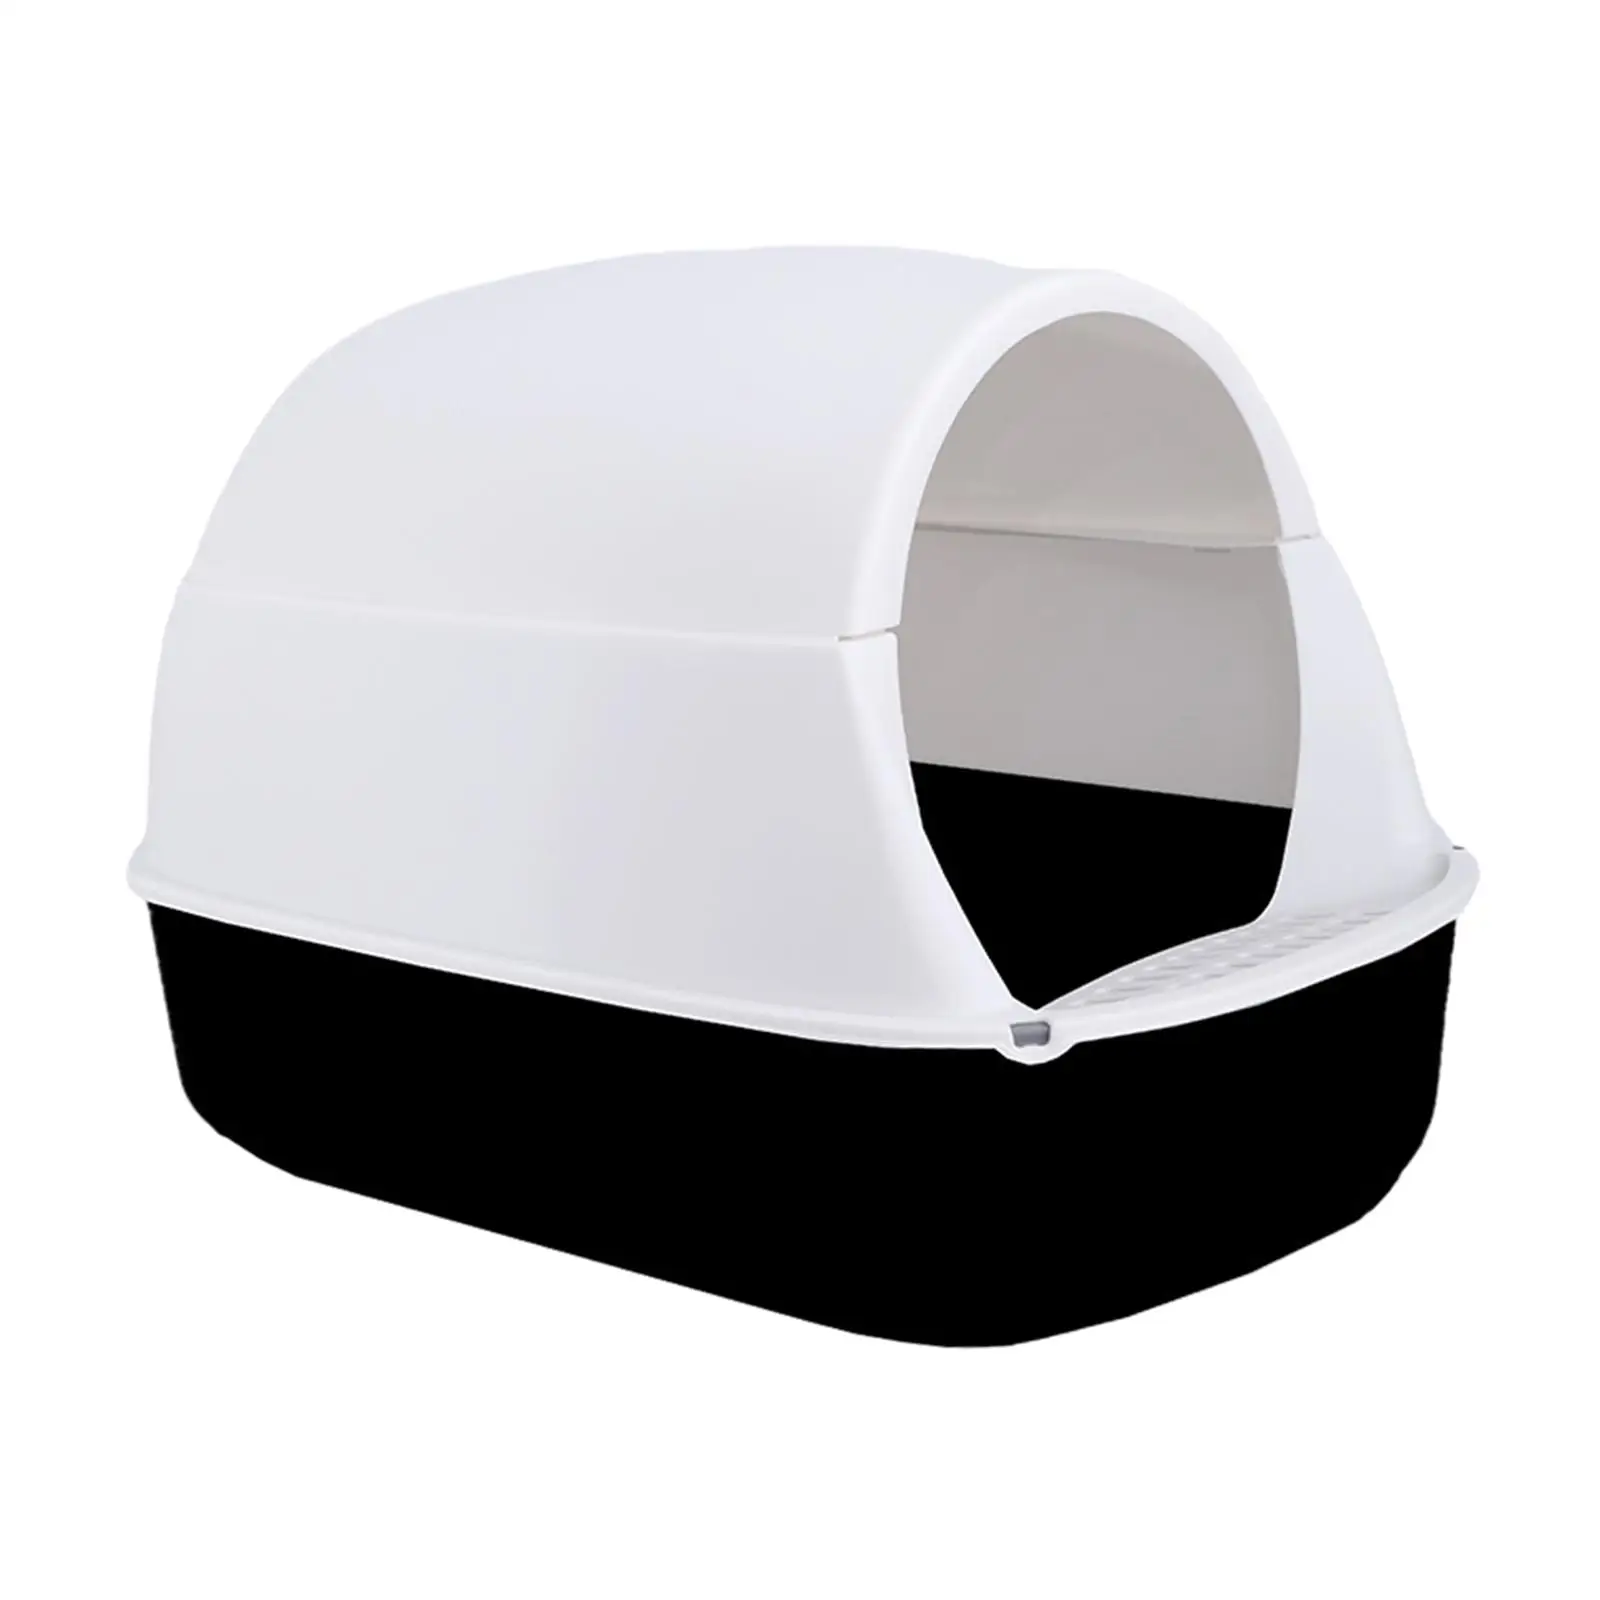 Hooded Cat Litter Box with Lid Detachable Pet Supplies Durable for Indoor Cats Large Cat Potty Cat Litter Tray Cat Toilet